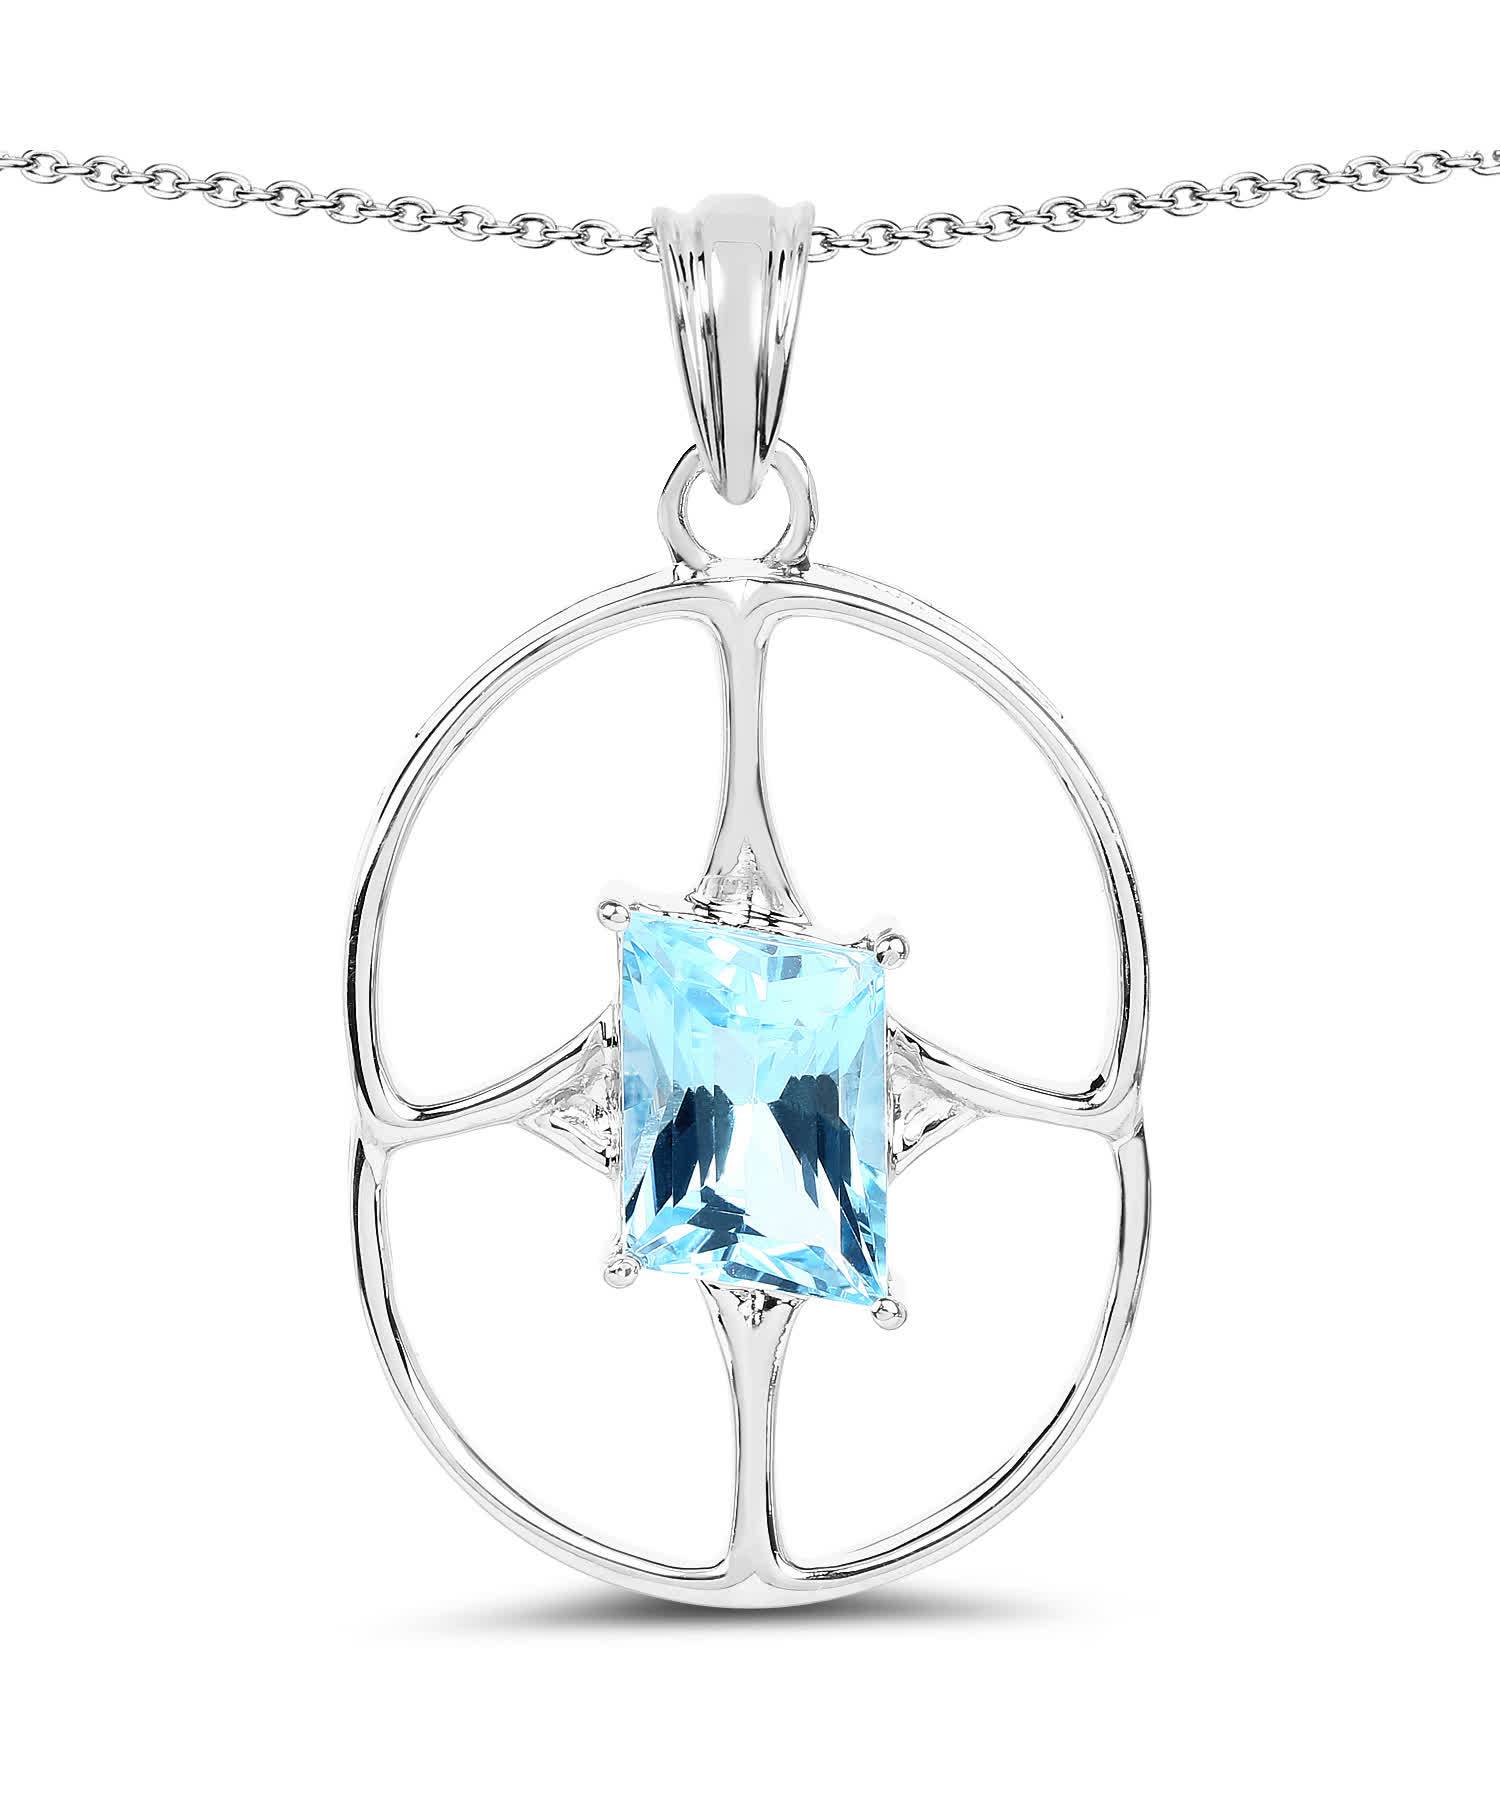 5.25ctw Natural Swiss Blue Topaz Rhodium Plated 925 Sterling Silver Pendant With Chain View 1